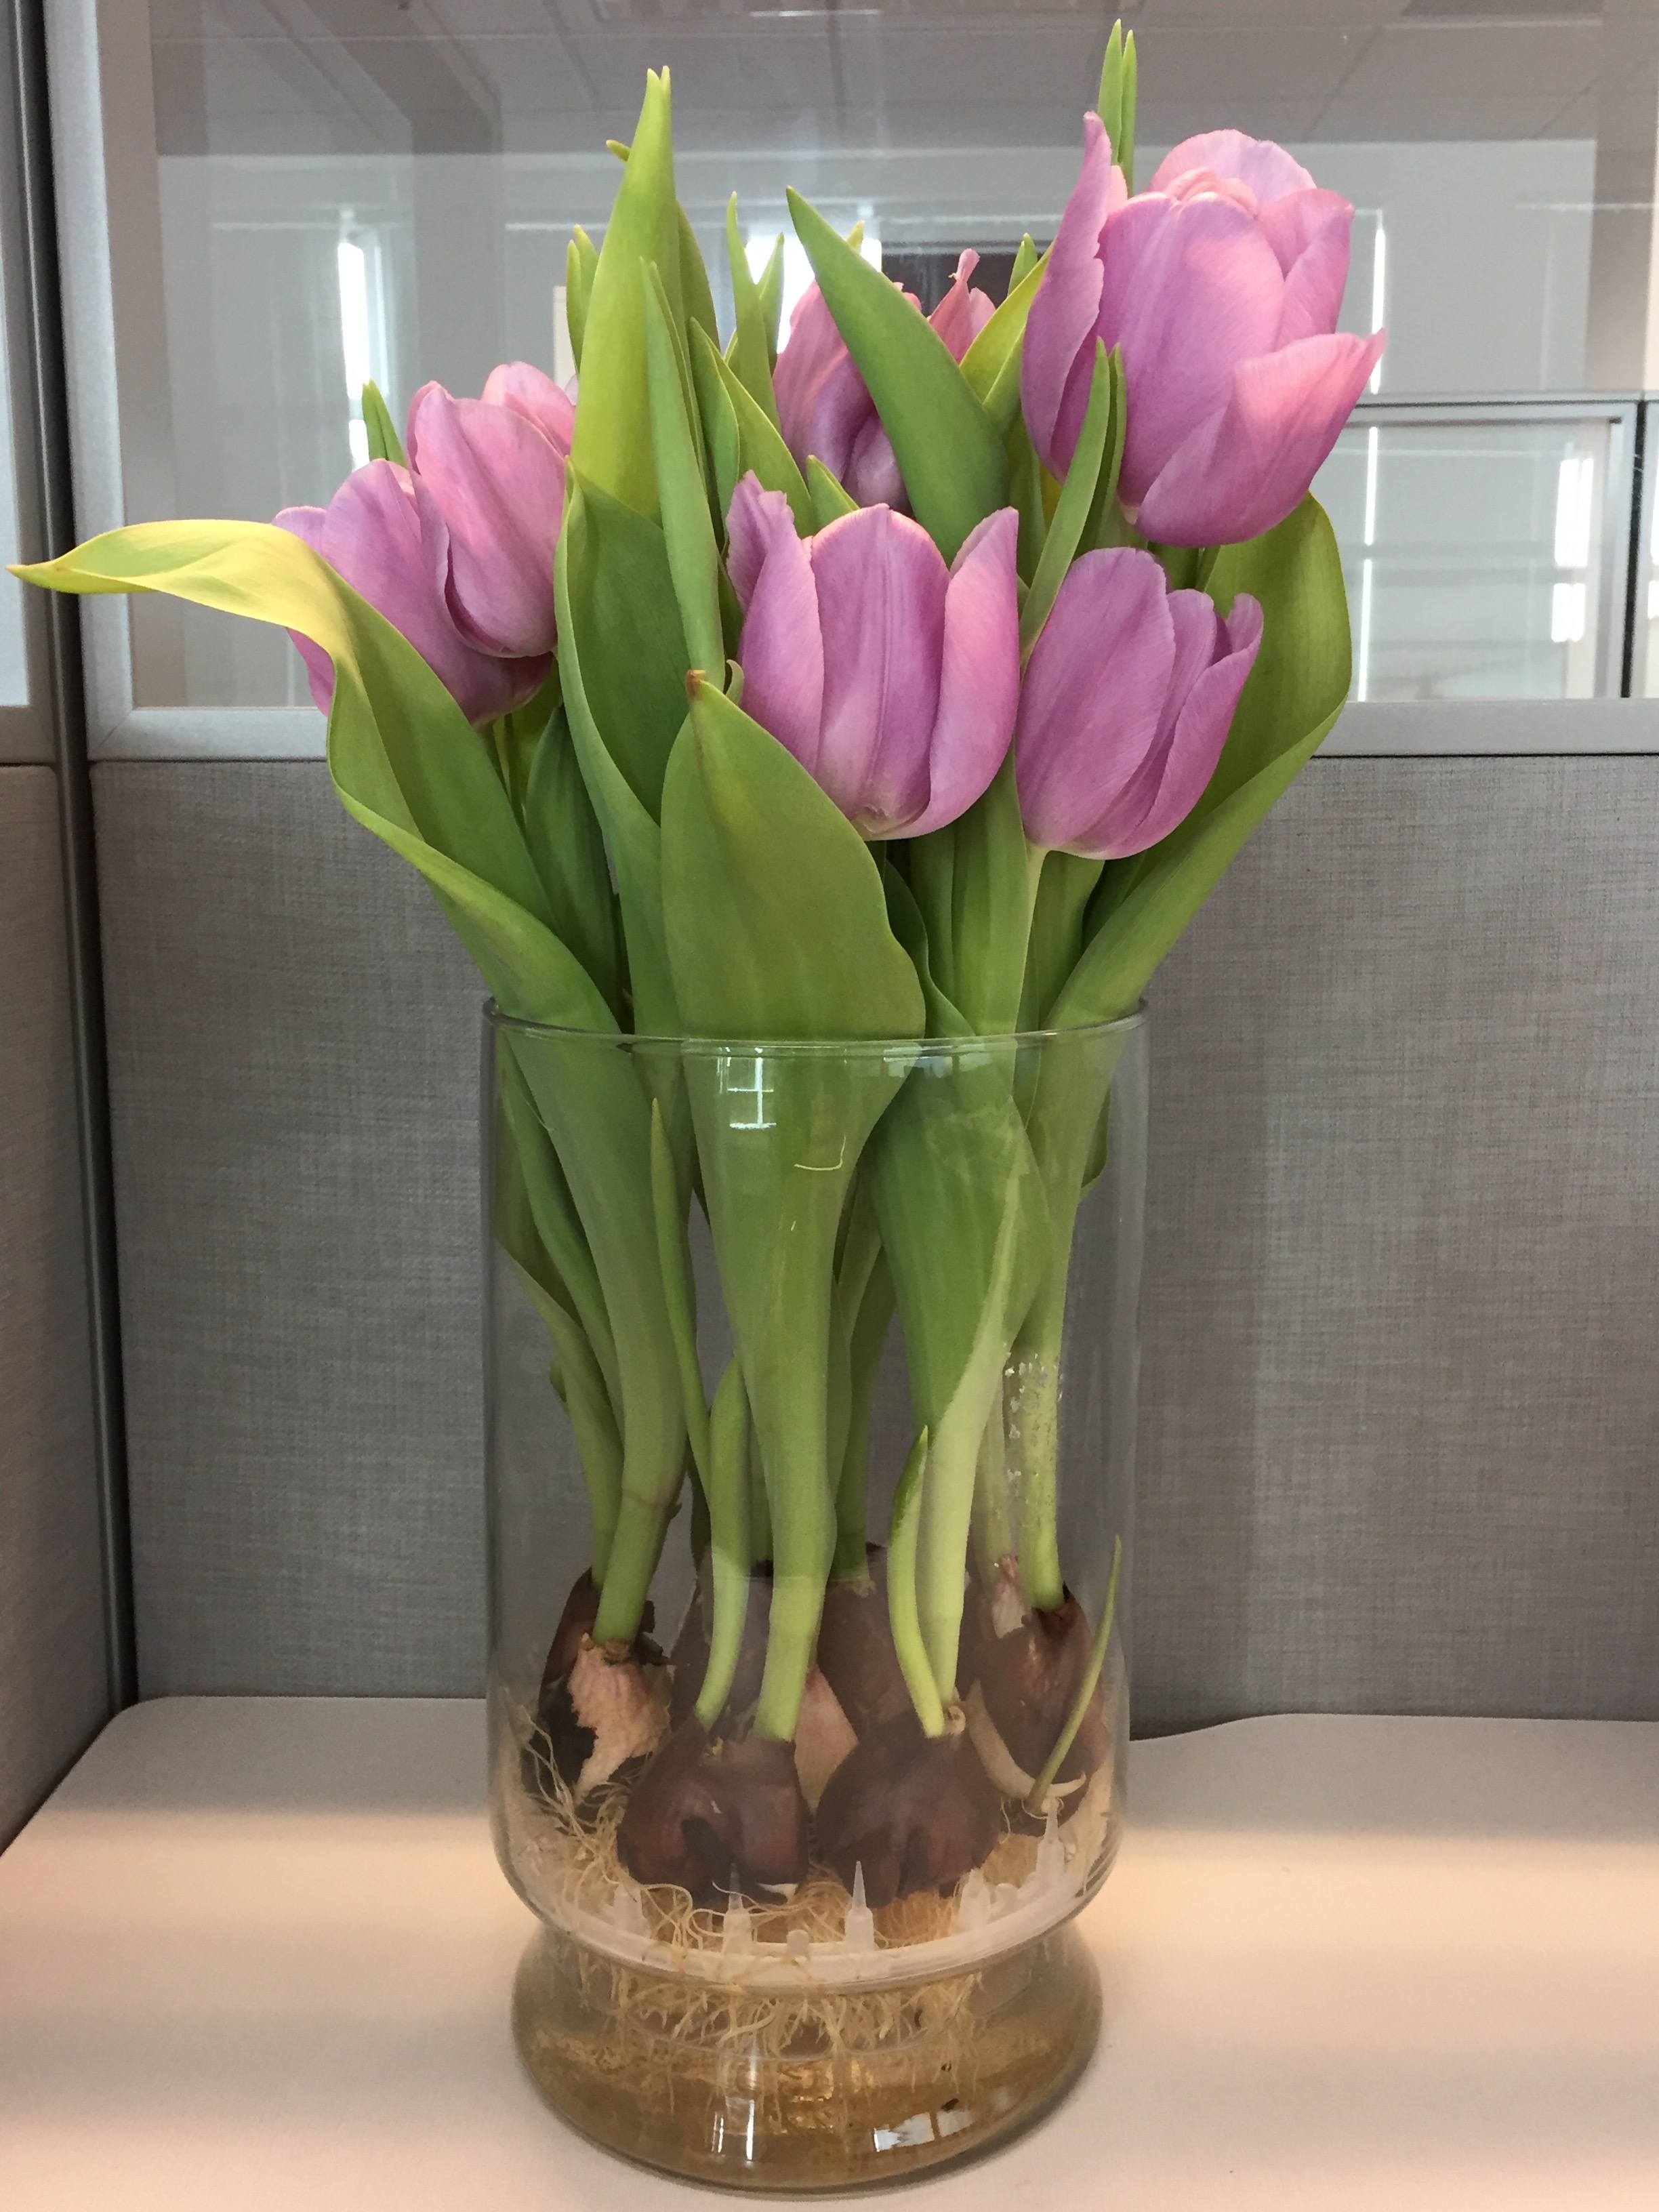 Tulips in My Work Cubicle, It's the weekend! Number 47